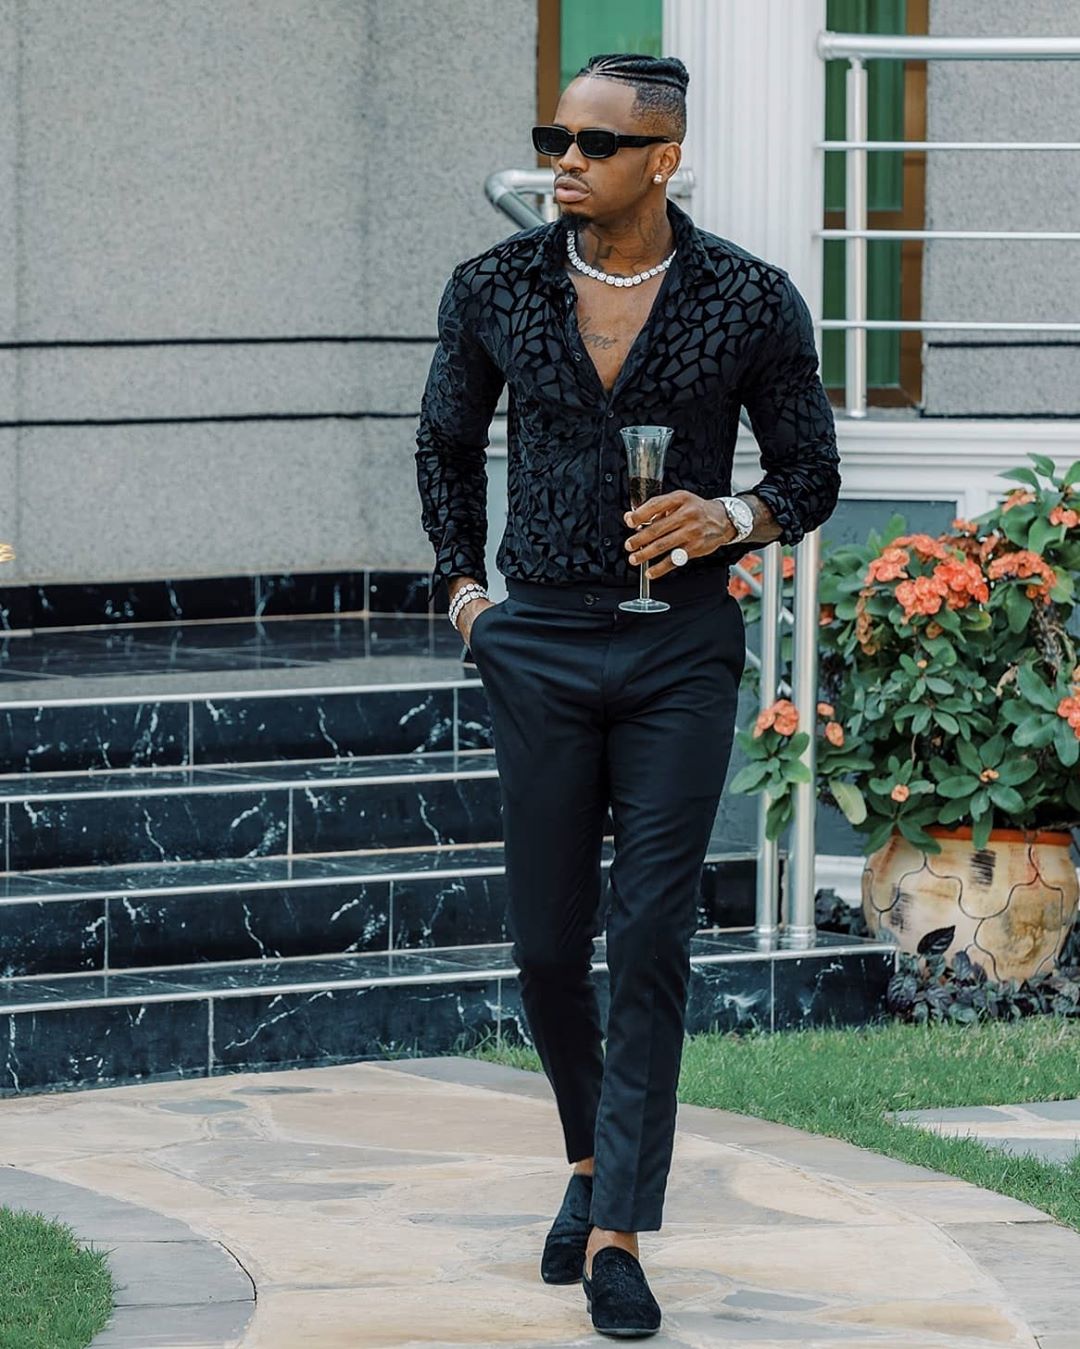 africa-african-male-celebrities-suit-formal-best-dressed-fashion-style-rave